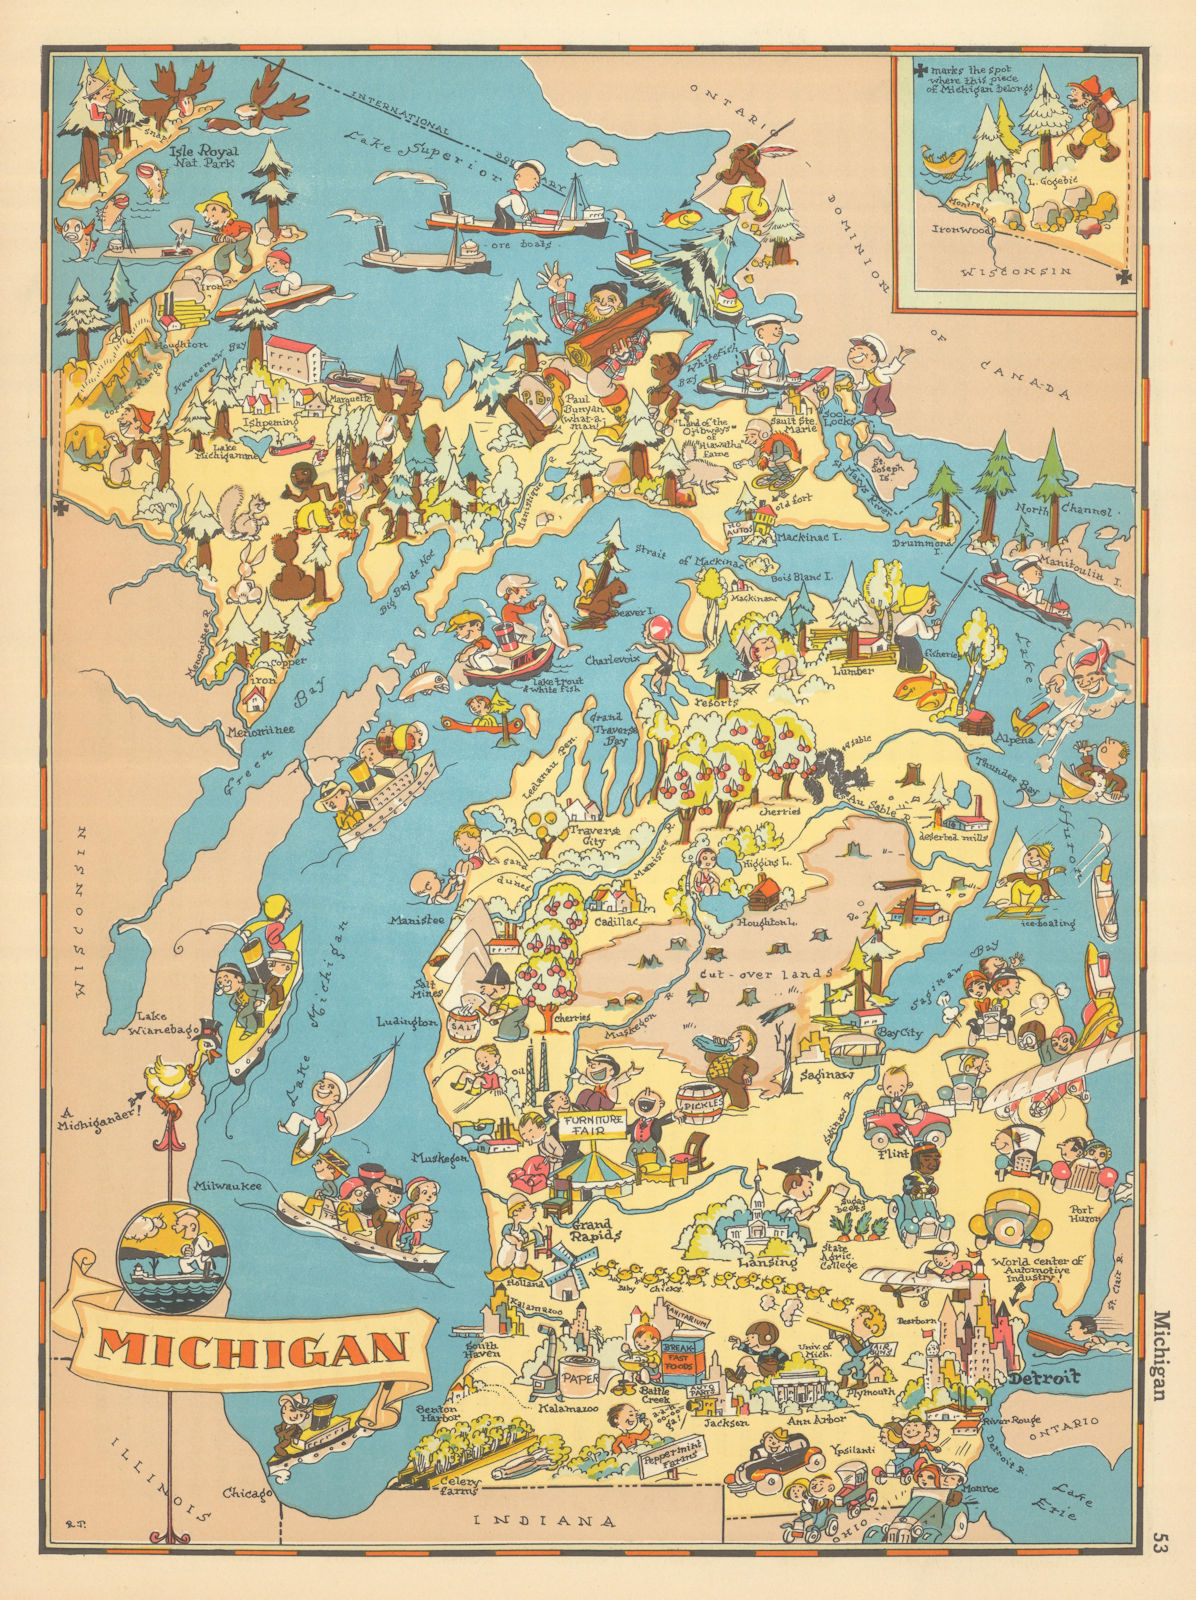 Michigan. Pictorial state map by Ruth Taylor White 1935 old vintage chart